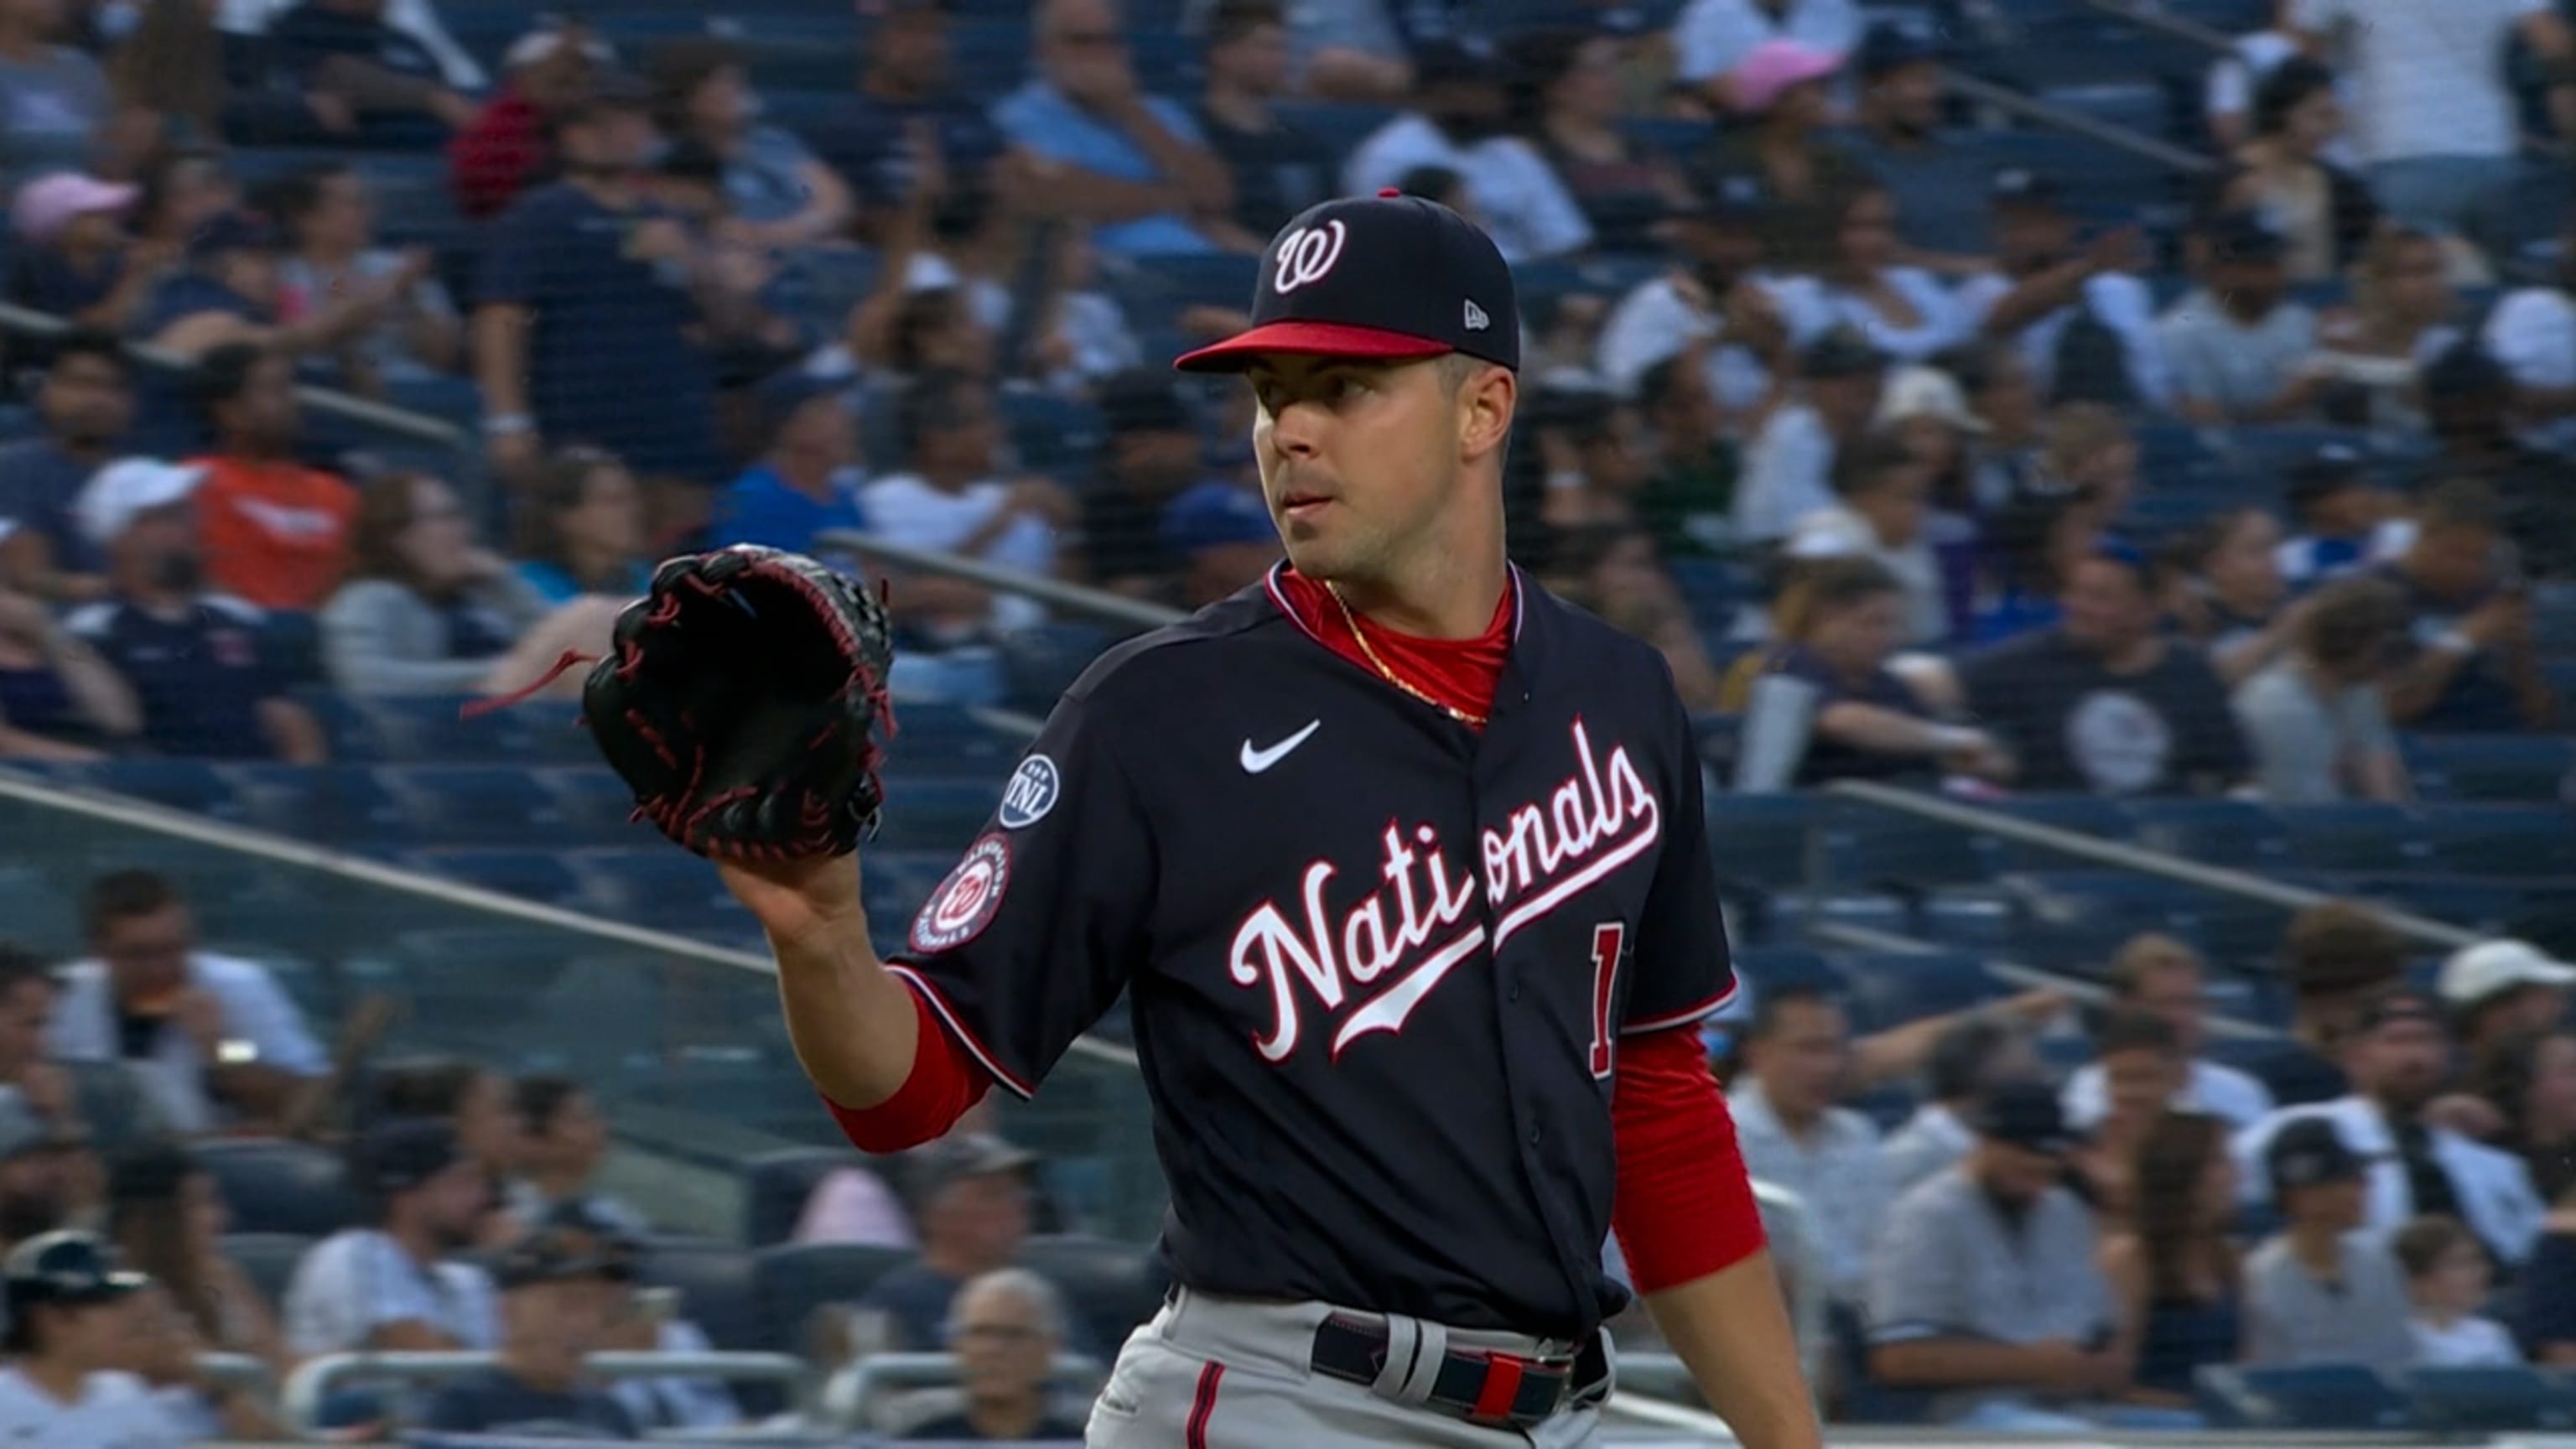 Washington Nationals have runner thrown out on walk